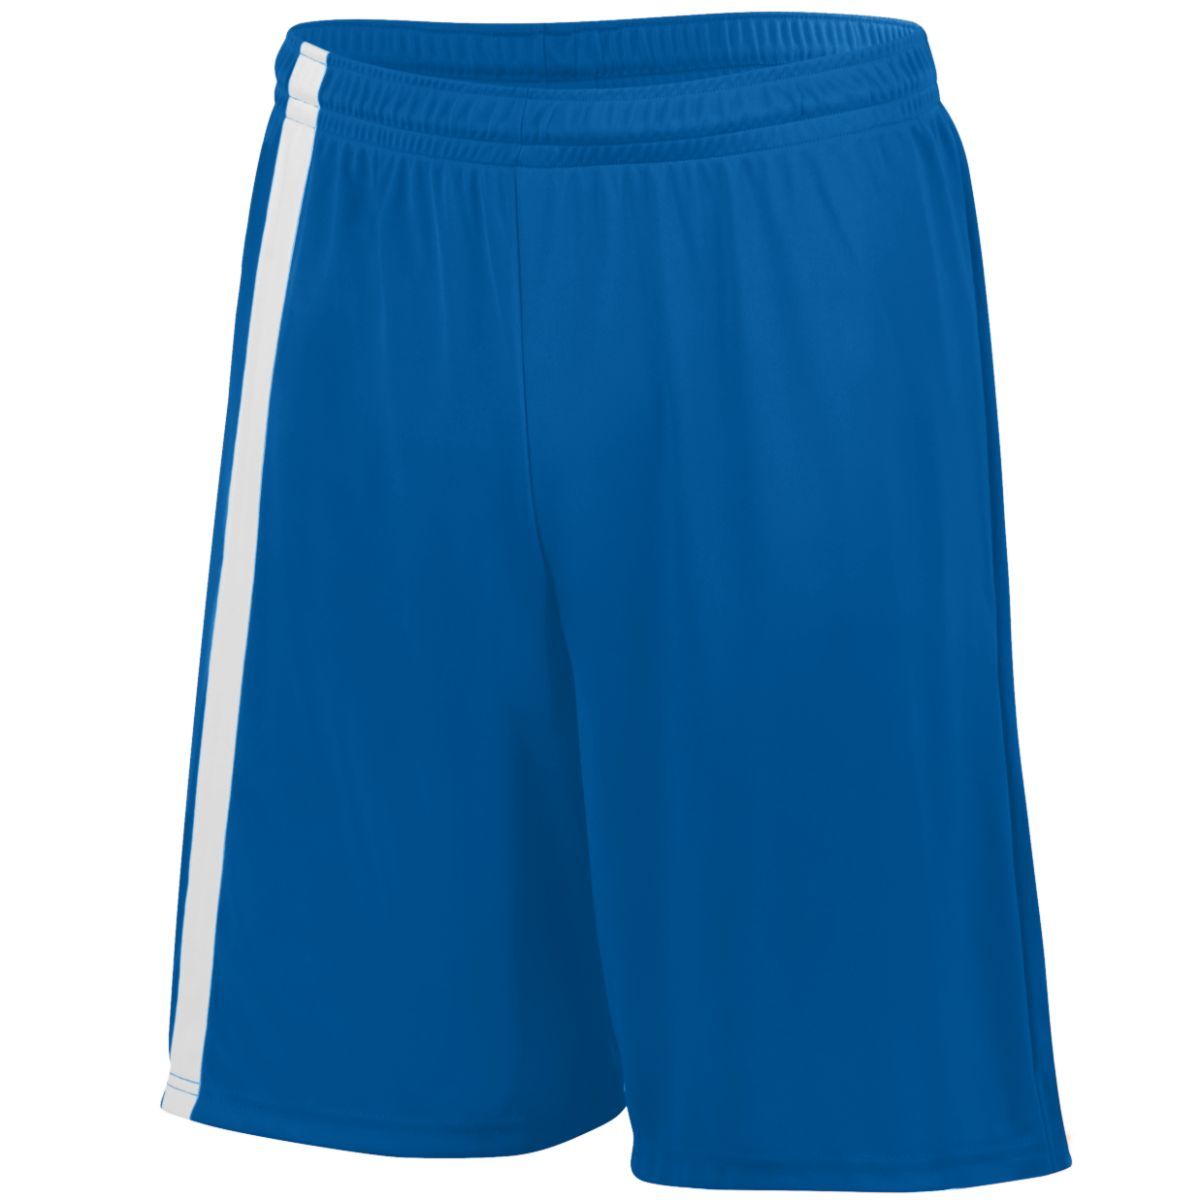 Augusta Sportswear Attacking Third Shorts in Royal/White  -Part of the Adult, Adult-Shorts, Augusta-Products, Soccer, All-Sports-1 product lines at KanaleyCreations.com